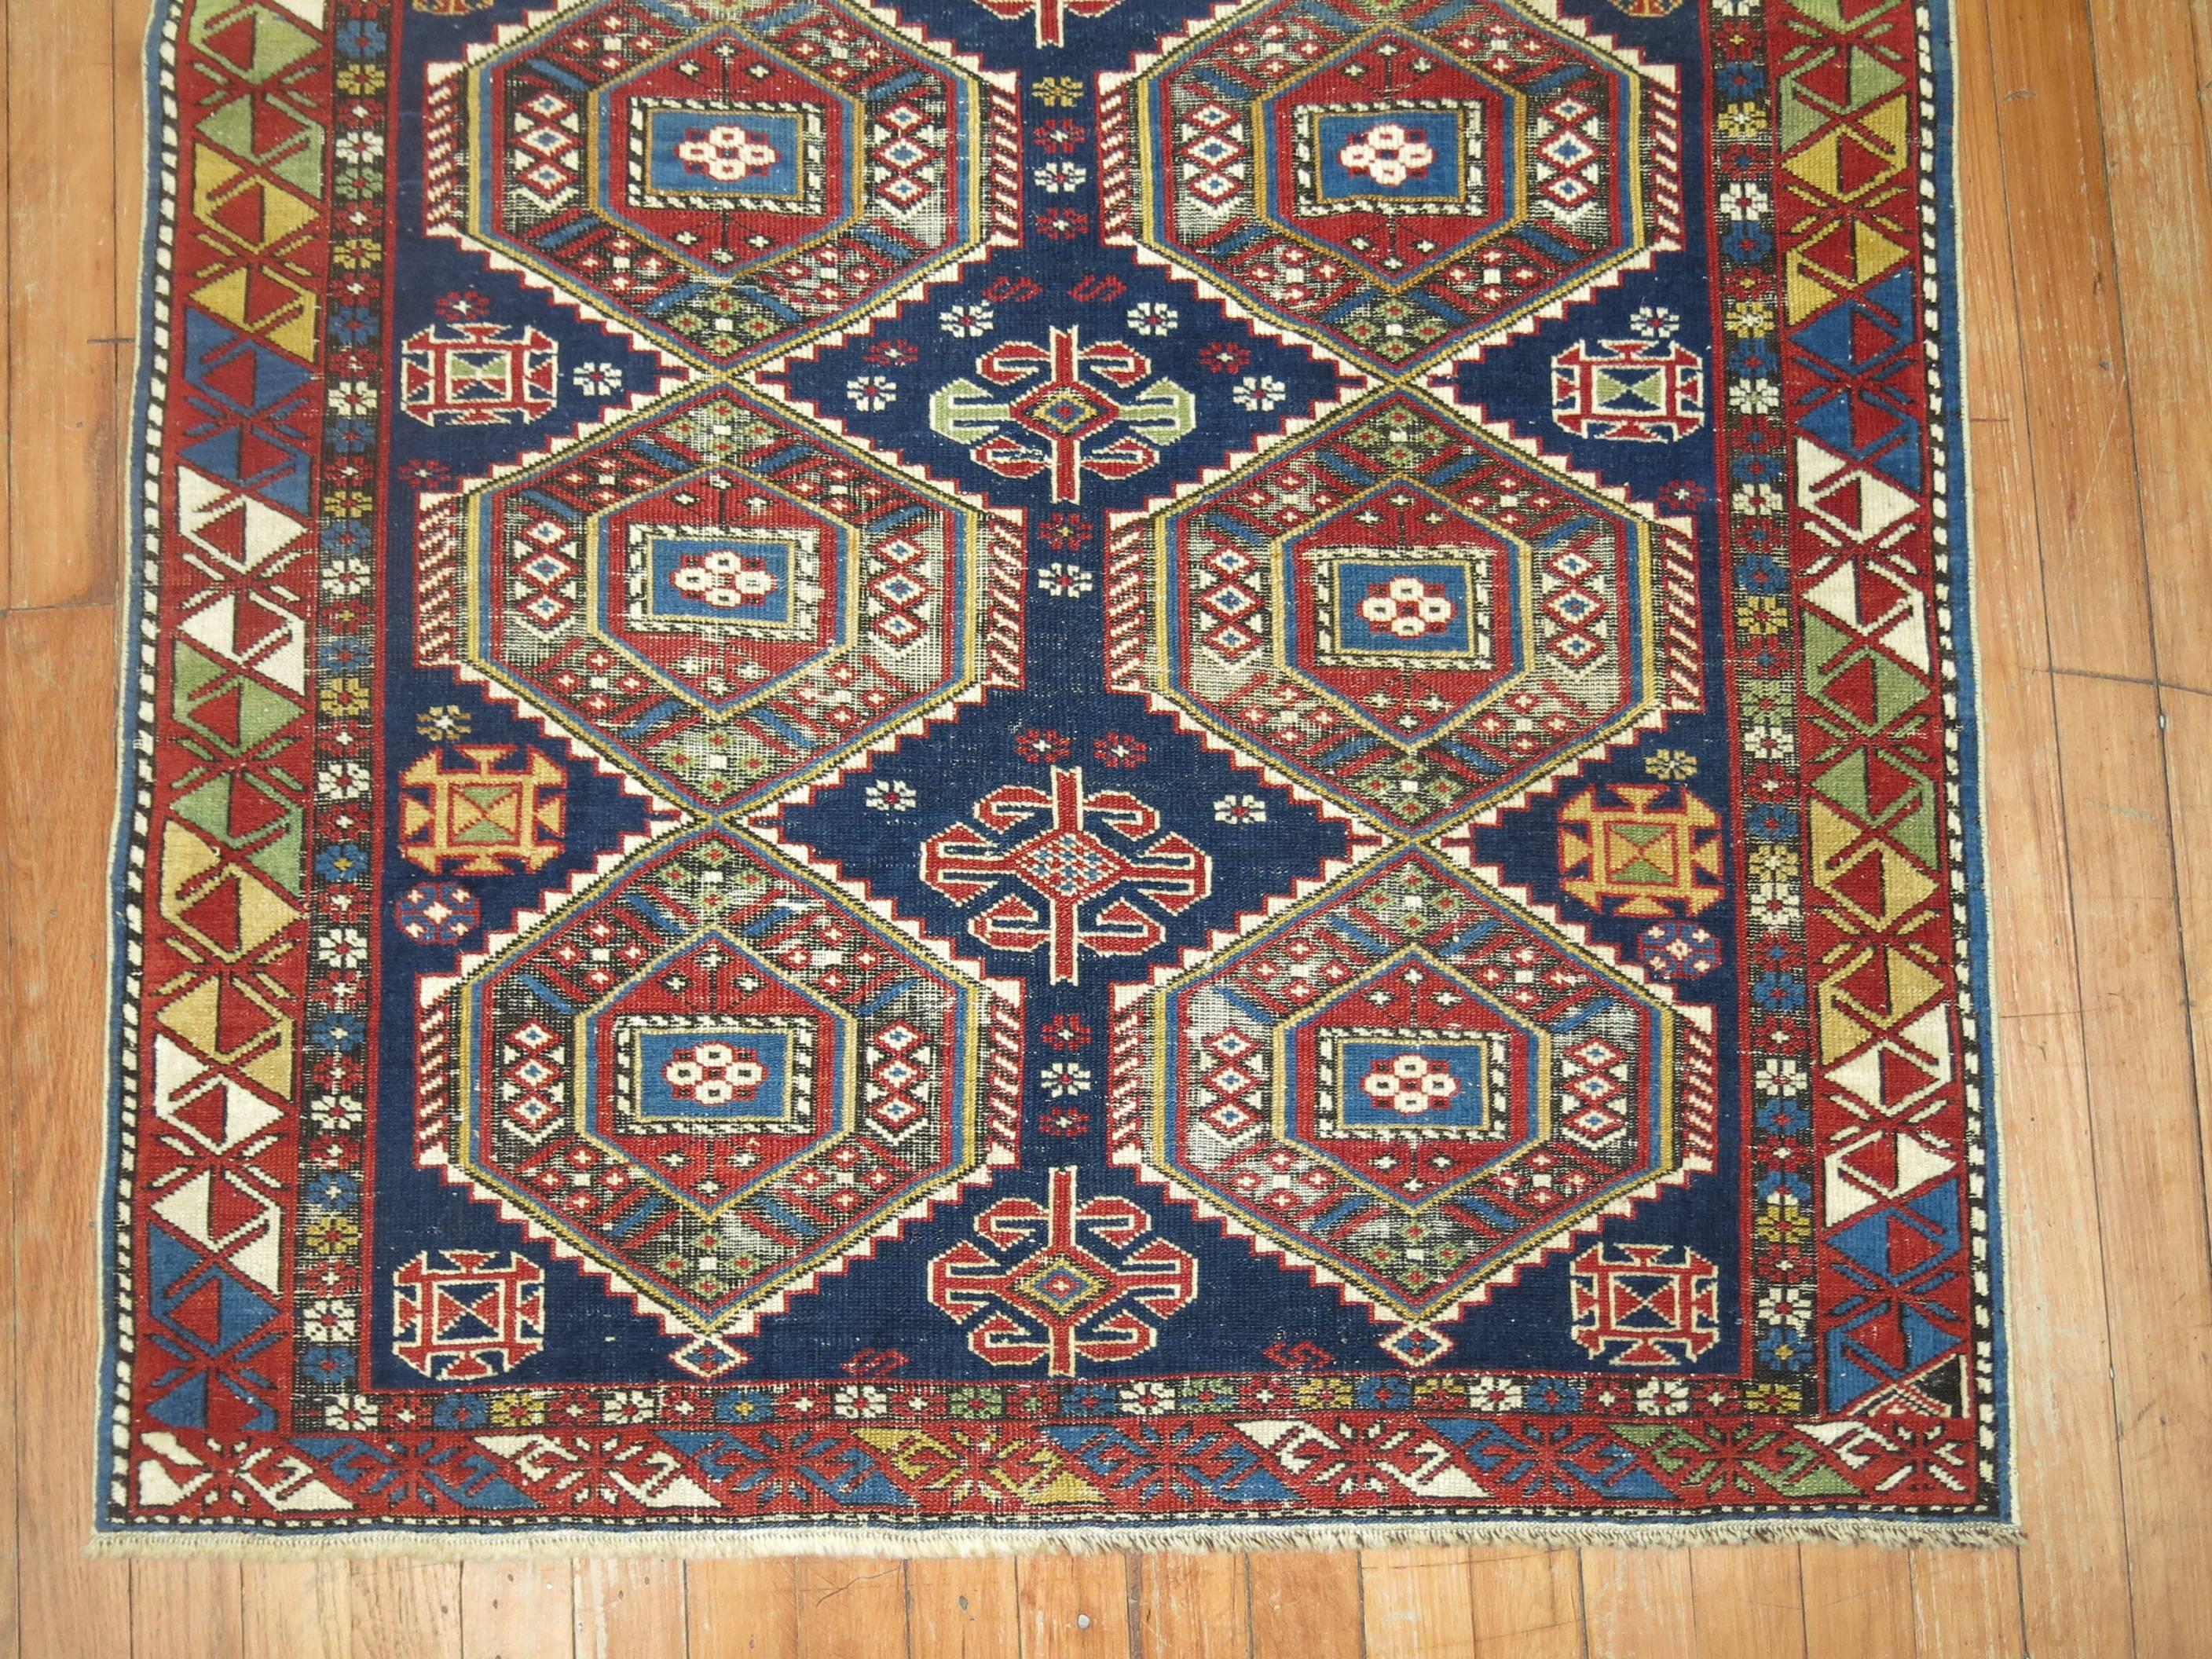 An early 20th century finely wove, jewel toned antique Shirvan rug from the Caucasus.

3'4'' x 5'2''